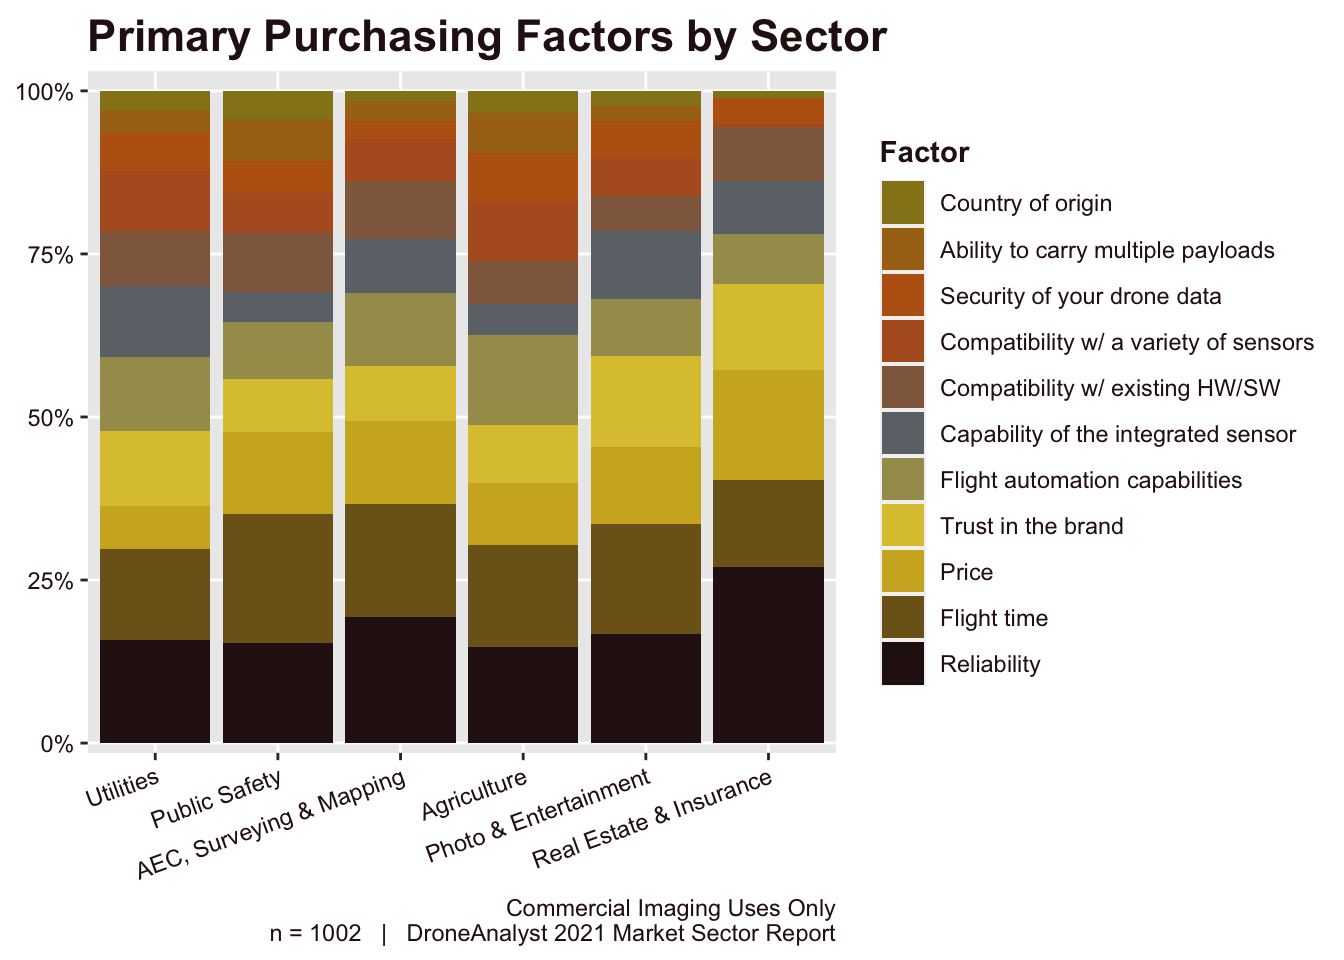 Primary Purchasing Factors by Sector